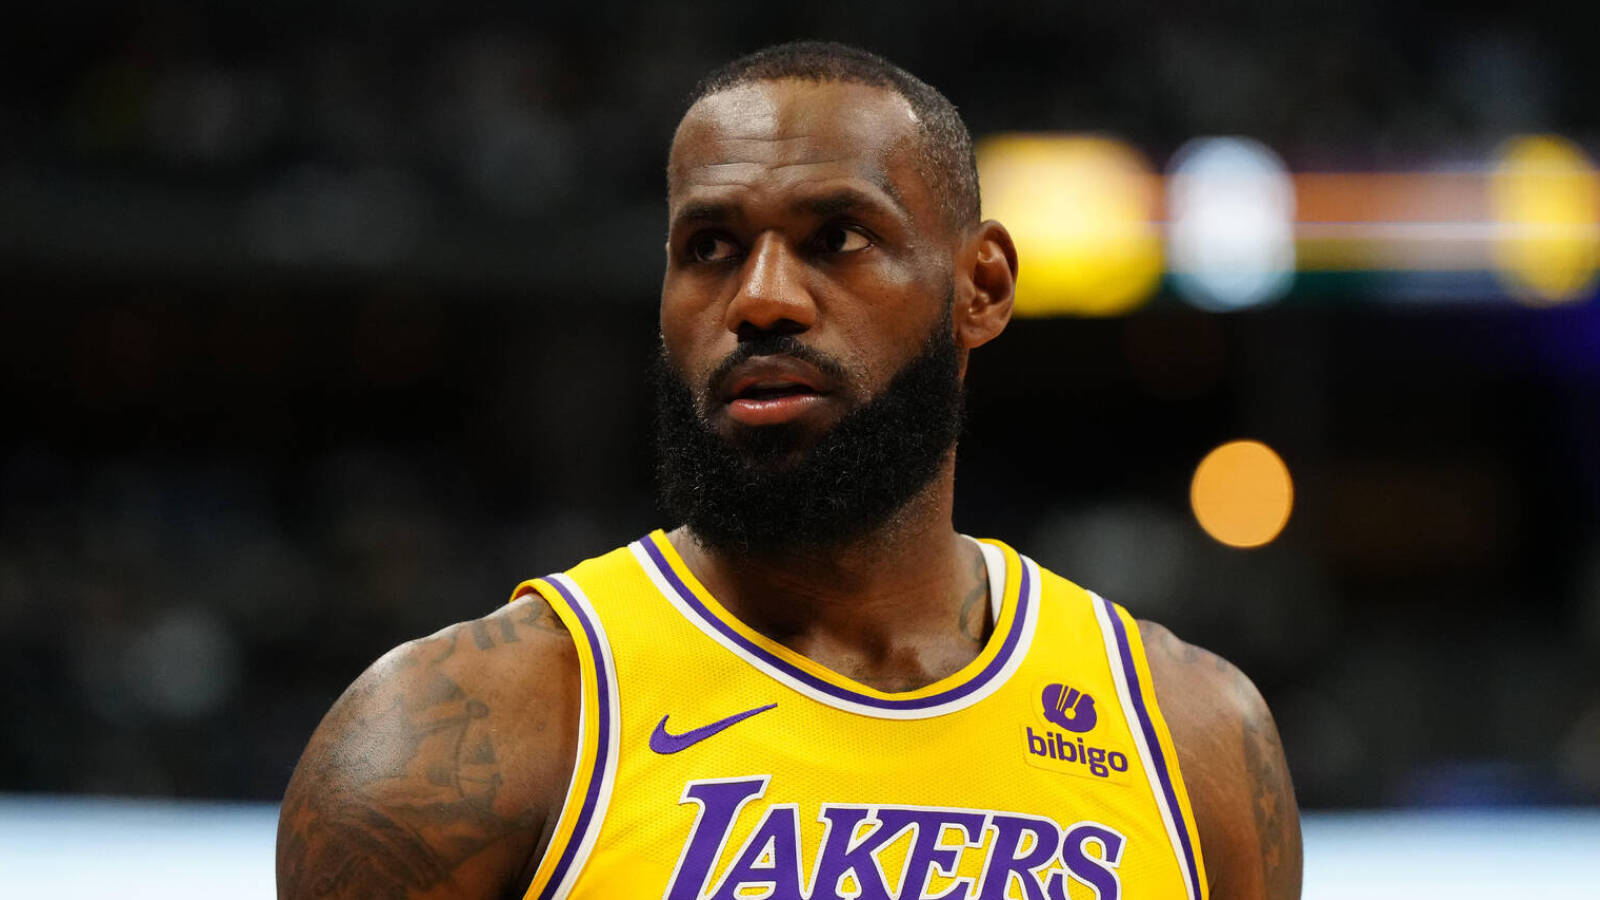 LeBron James rues 'missed opportunities' against Nuggets